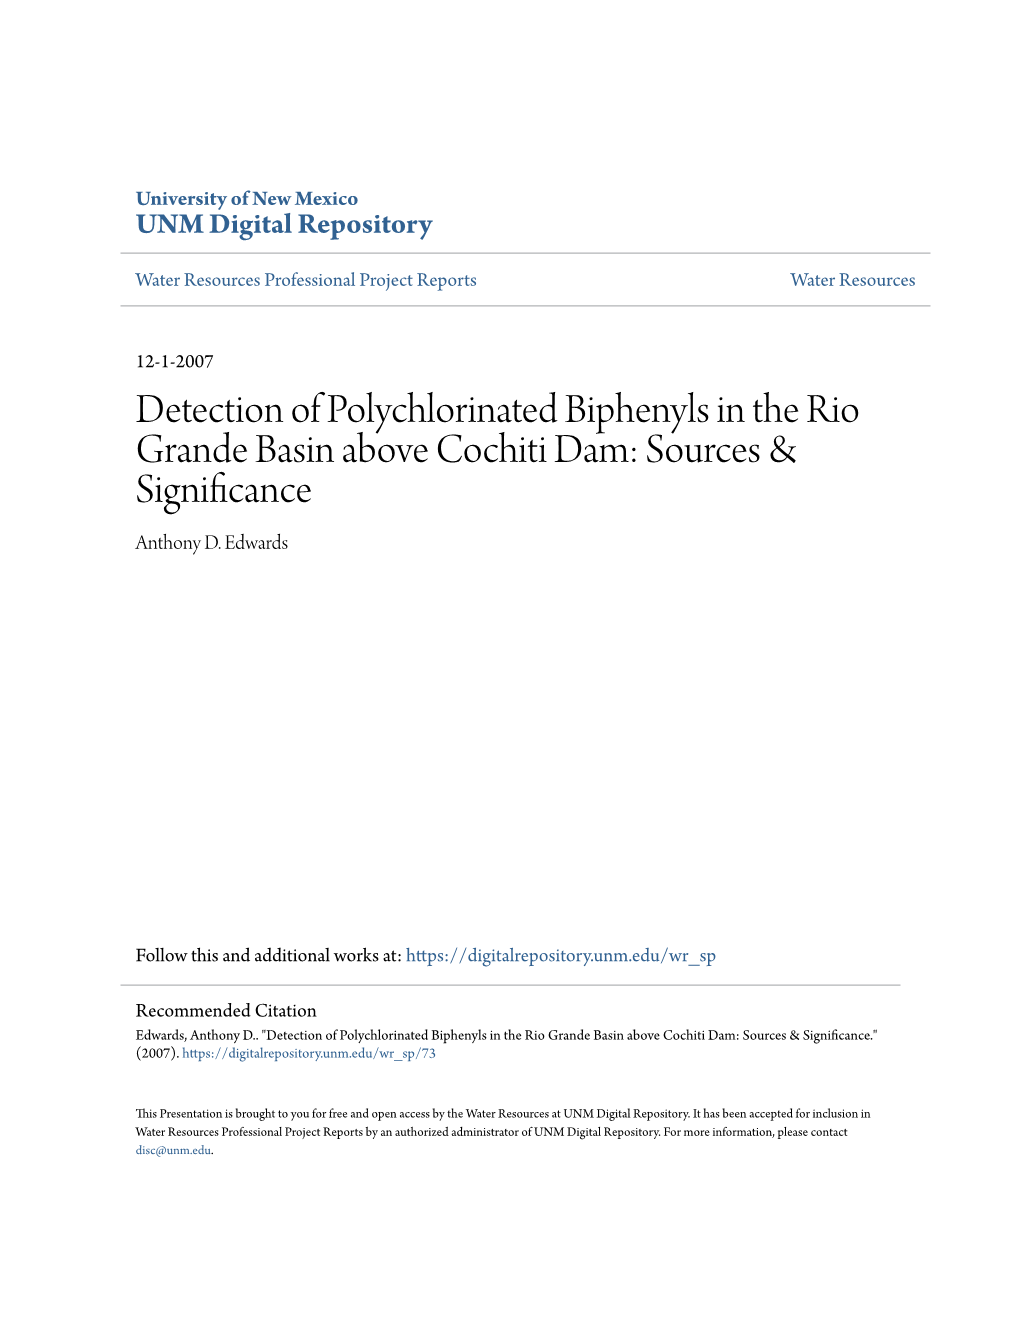 Detection of Polychlorinated Biphenyls in the Rio Grande Basin Above Cochiti Dam: Sources & Significance Anthony D